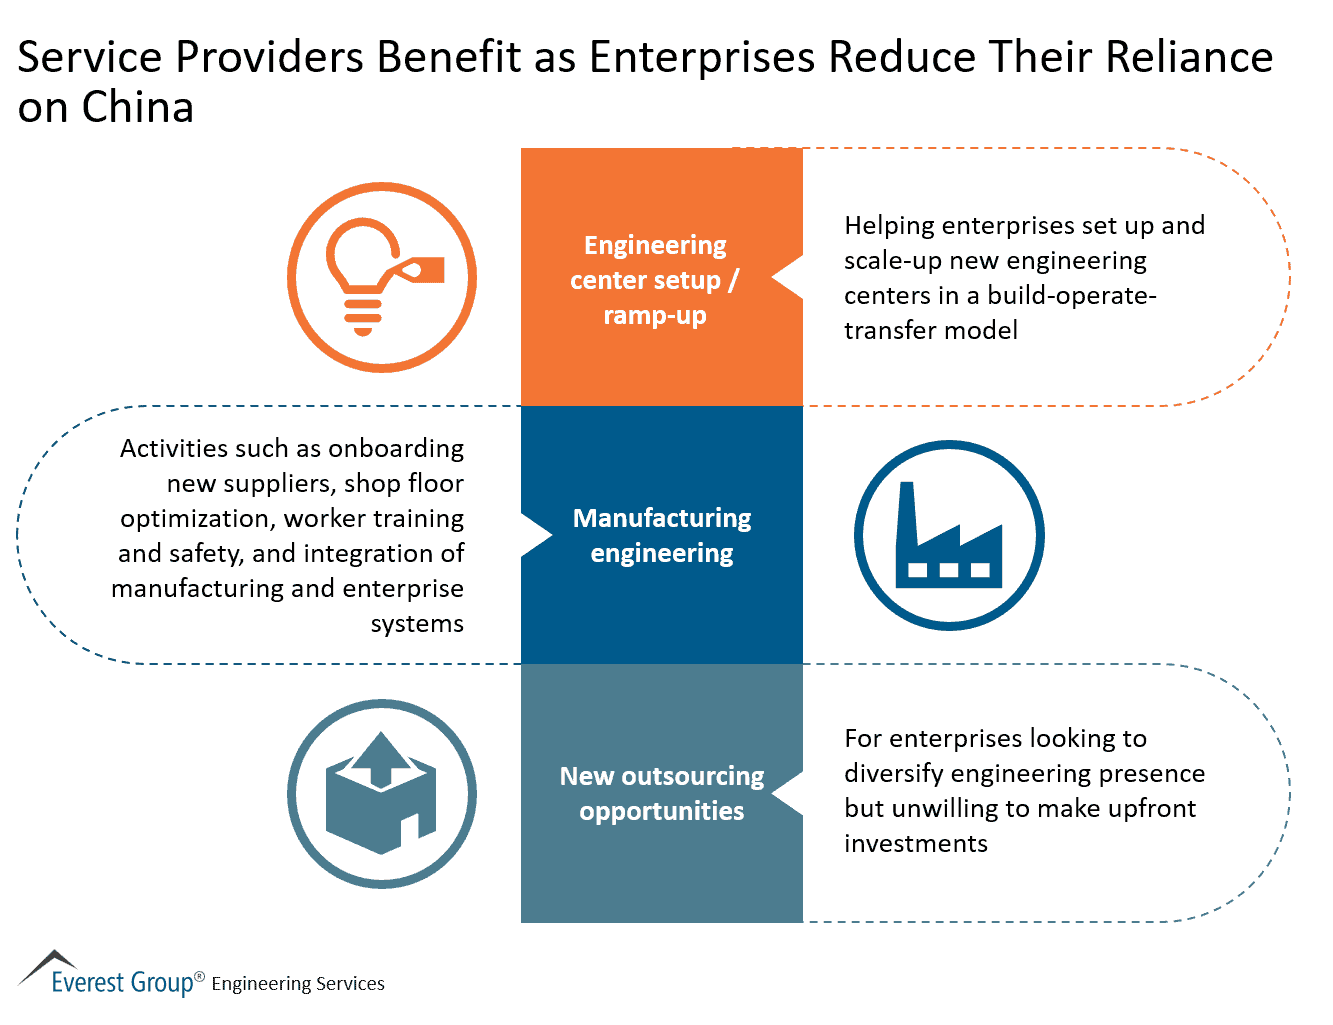 Service Providers Benefit as Enterprises Reduce Their Reliance on China